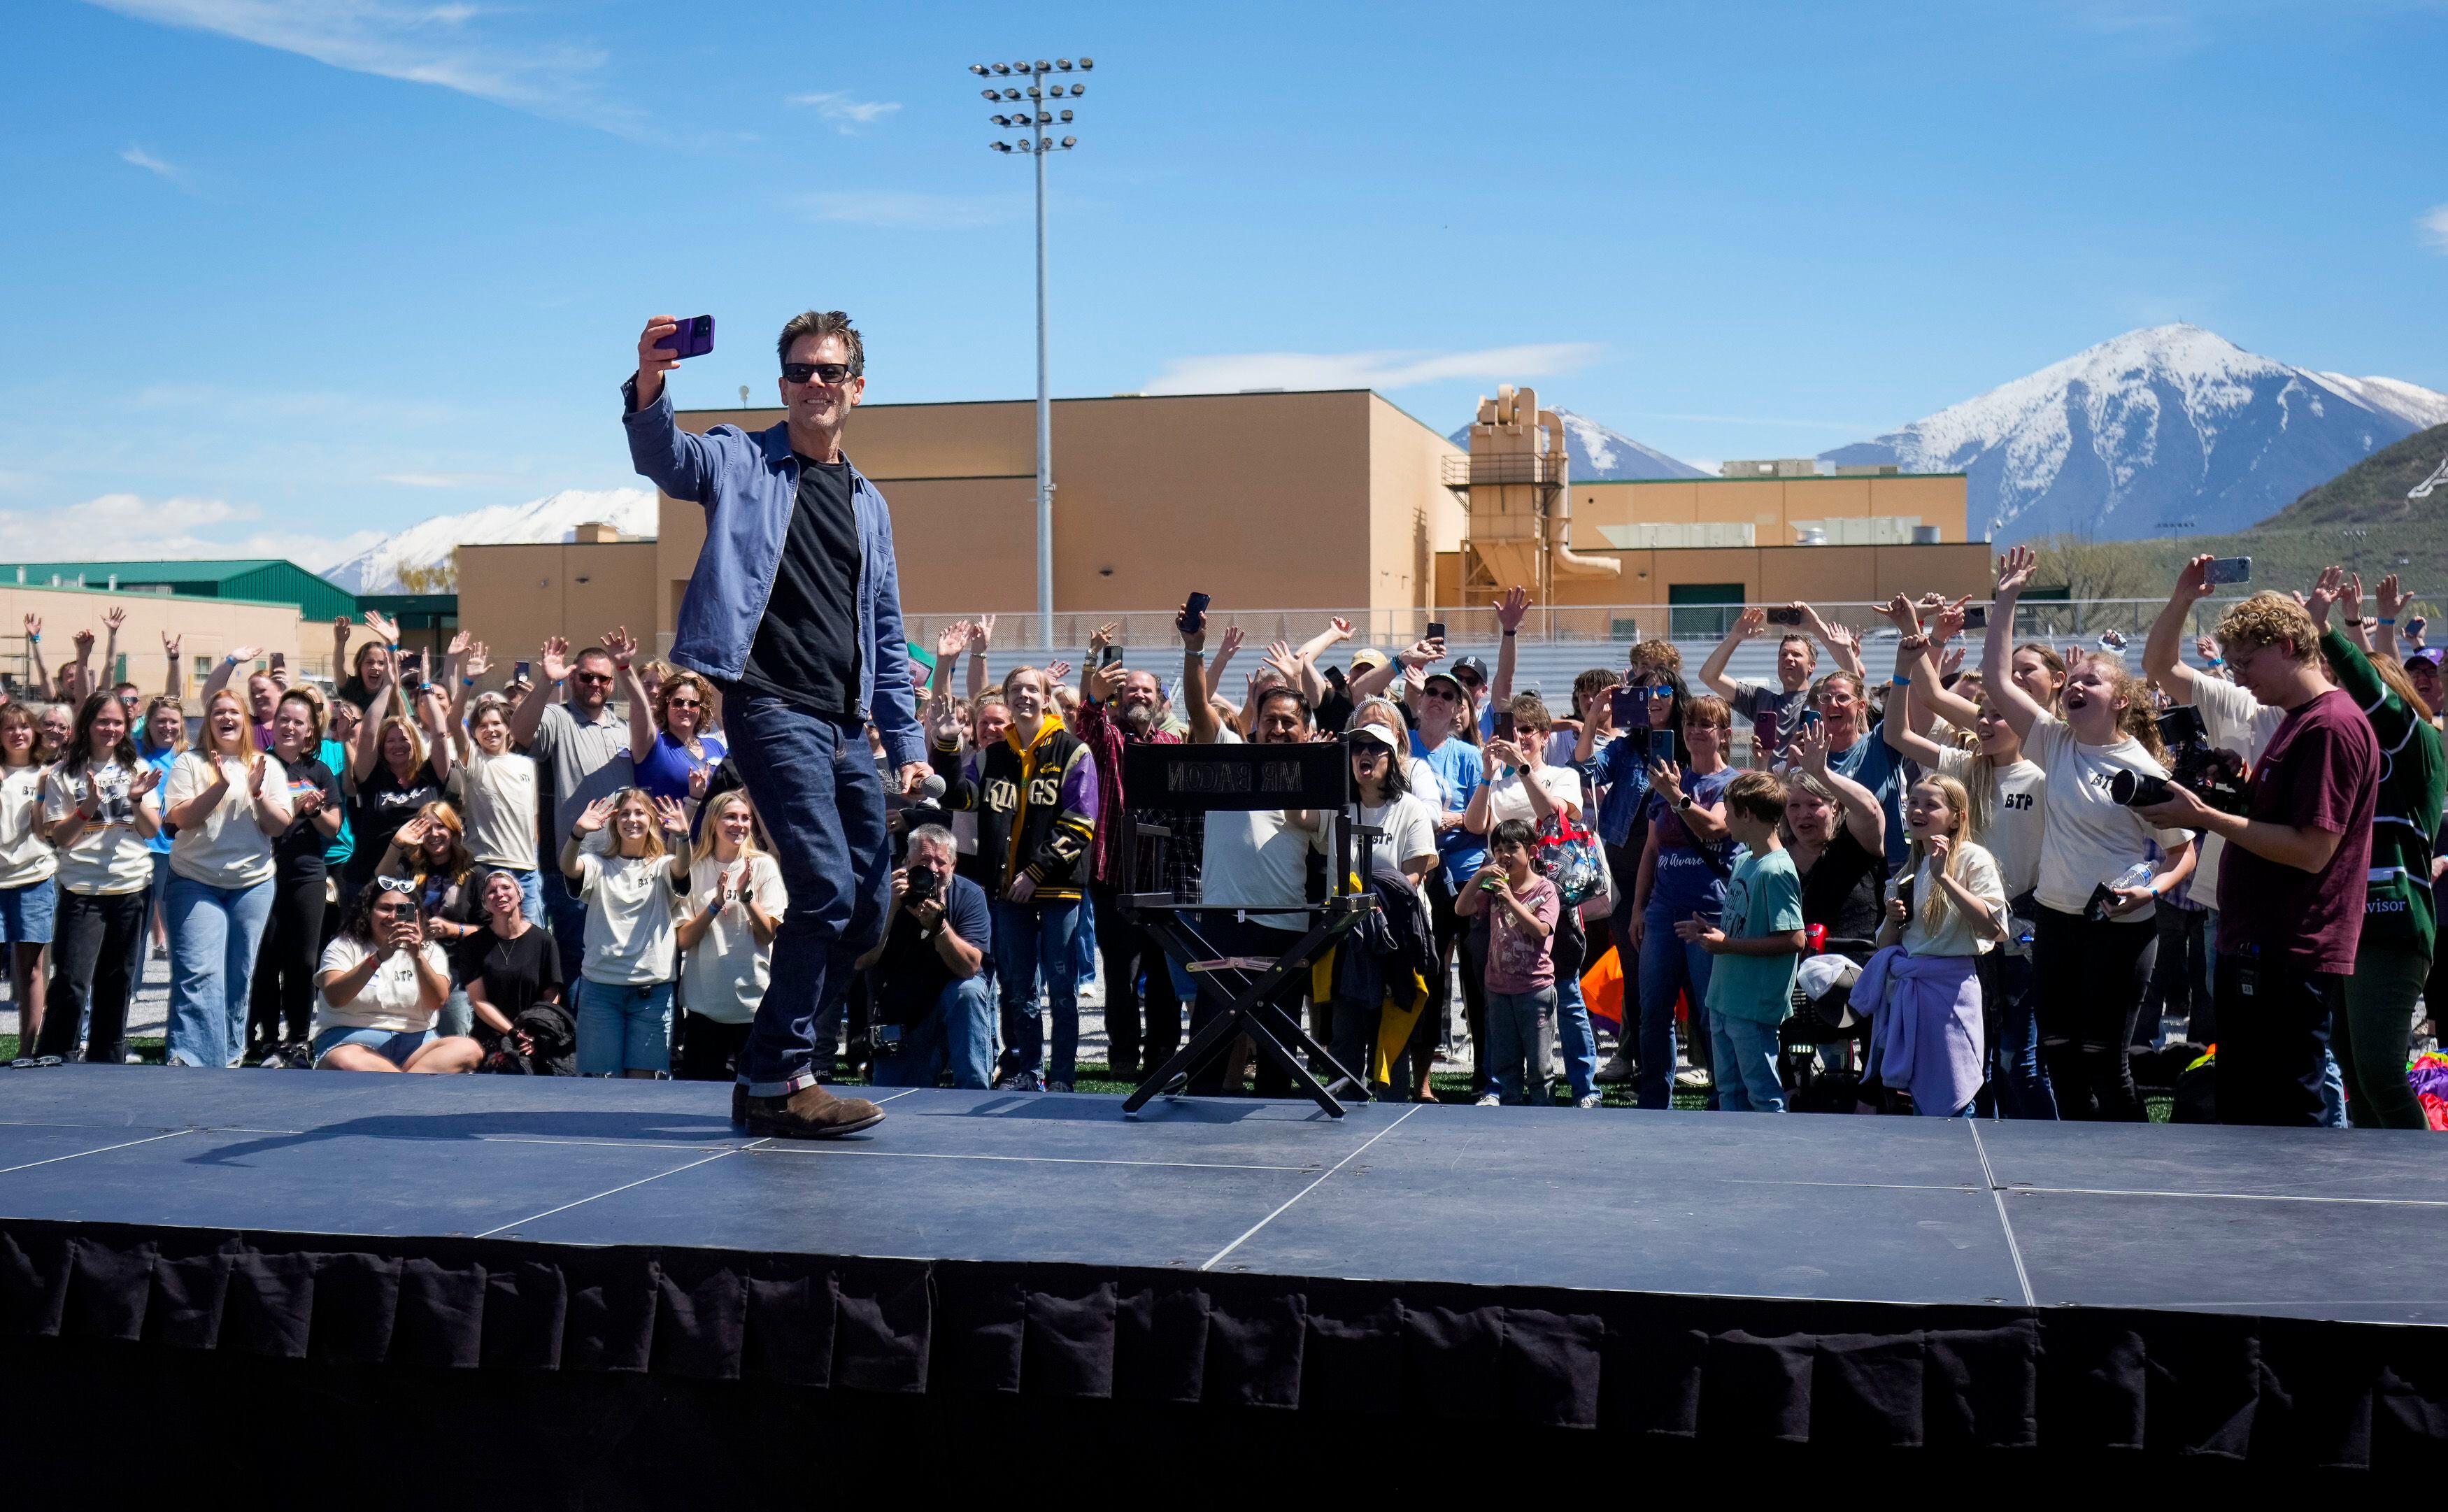 (Bethany Baker  |  The Salt Lake Tribune) Kevin Bacon records a video with the crowd, playing into the "six degrees from Kevin Bacon" game, following a charity event to commemorate the 40th anniversary of the movie "Footloose" on the football field of Payson High School in Payson on Saturday, April 20, 2024.